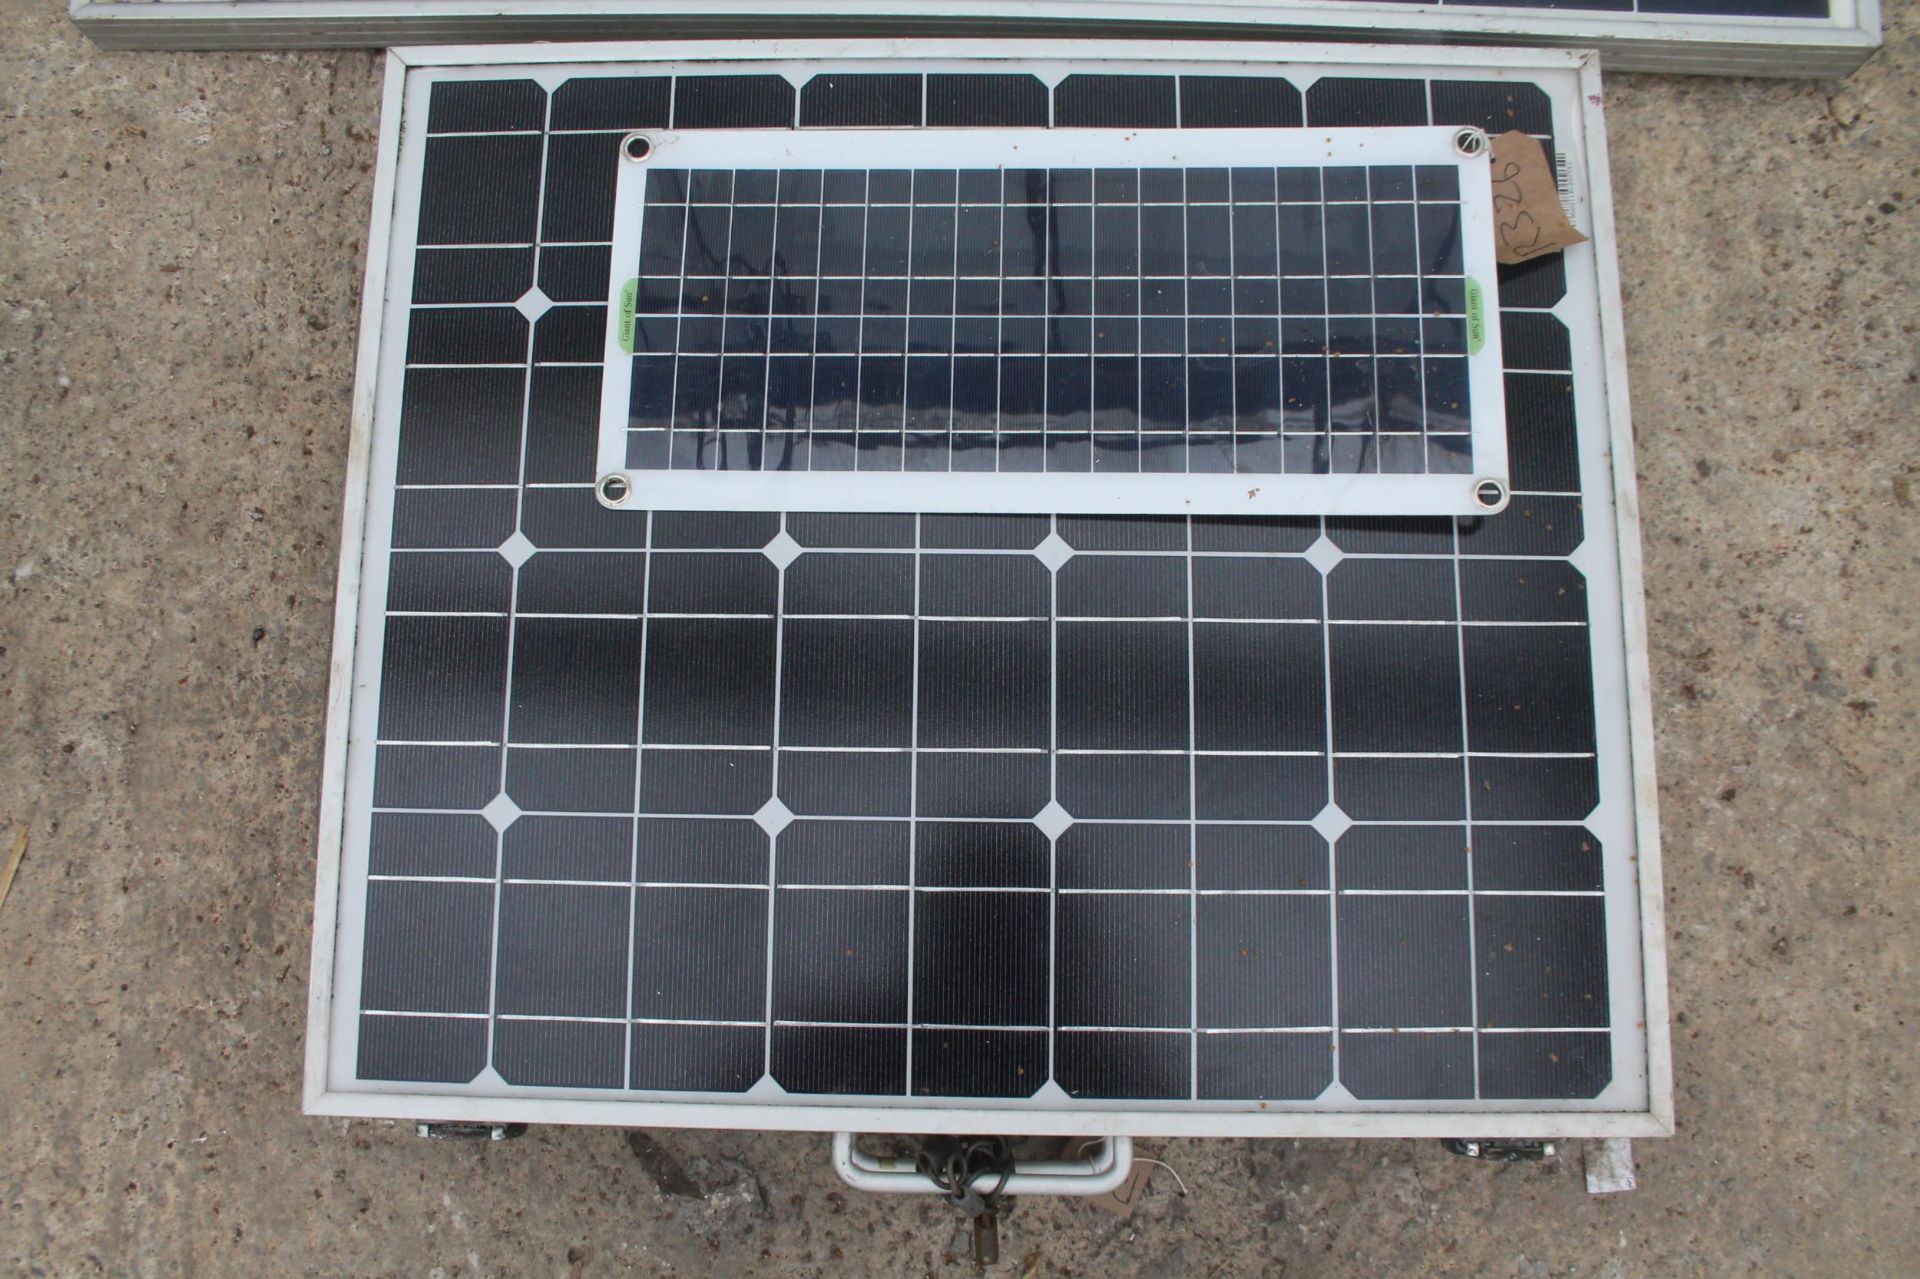 LARGE 80W SOLAR PANEL 91196 X 542 X 35MM, 2 20W PEAL PERFORMANCE SOLAR PANELS 405 X 340 X 25MM EACH, - Image 2 of 4